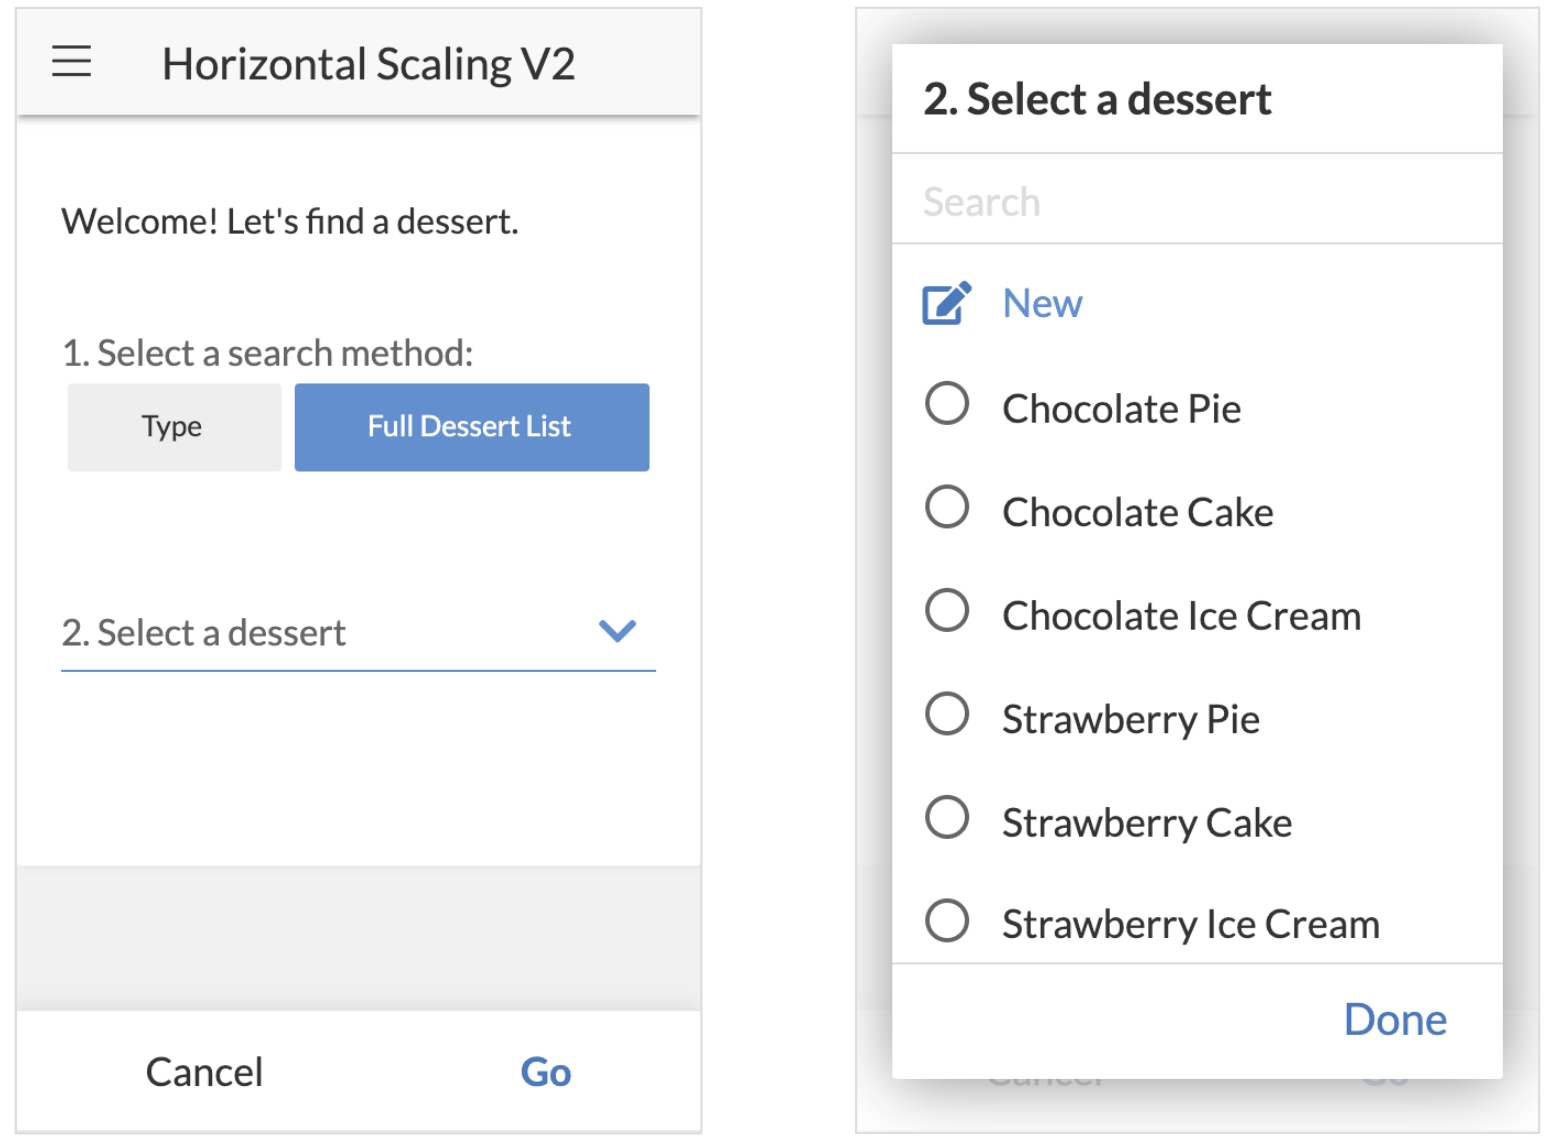 Allow users to click Full Dessert List to view and select a dessert